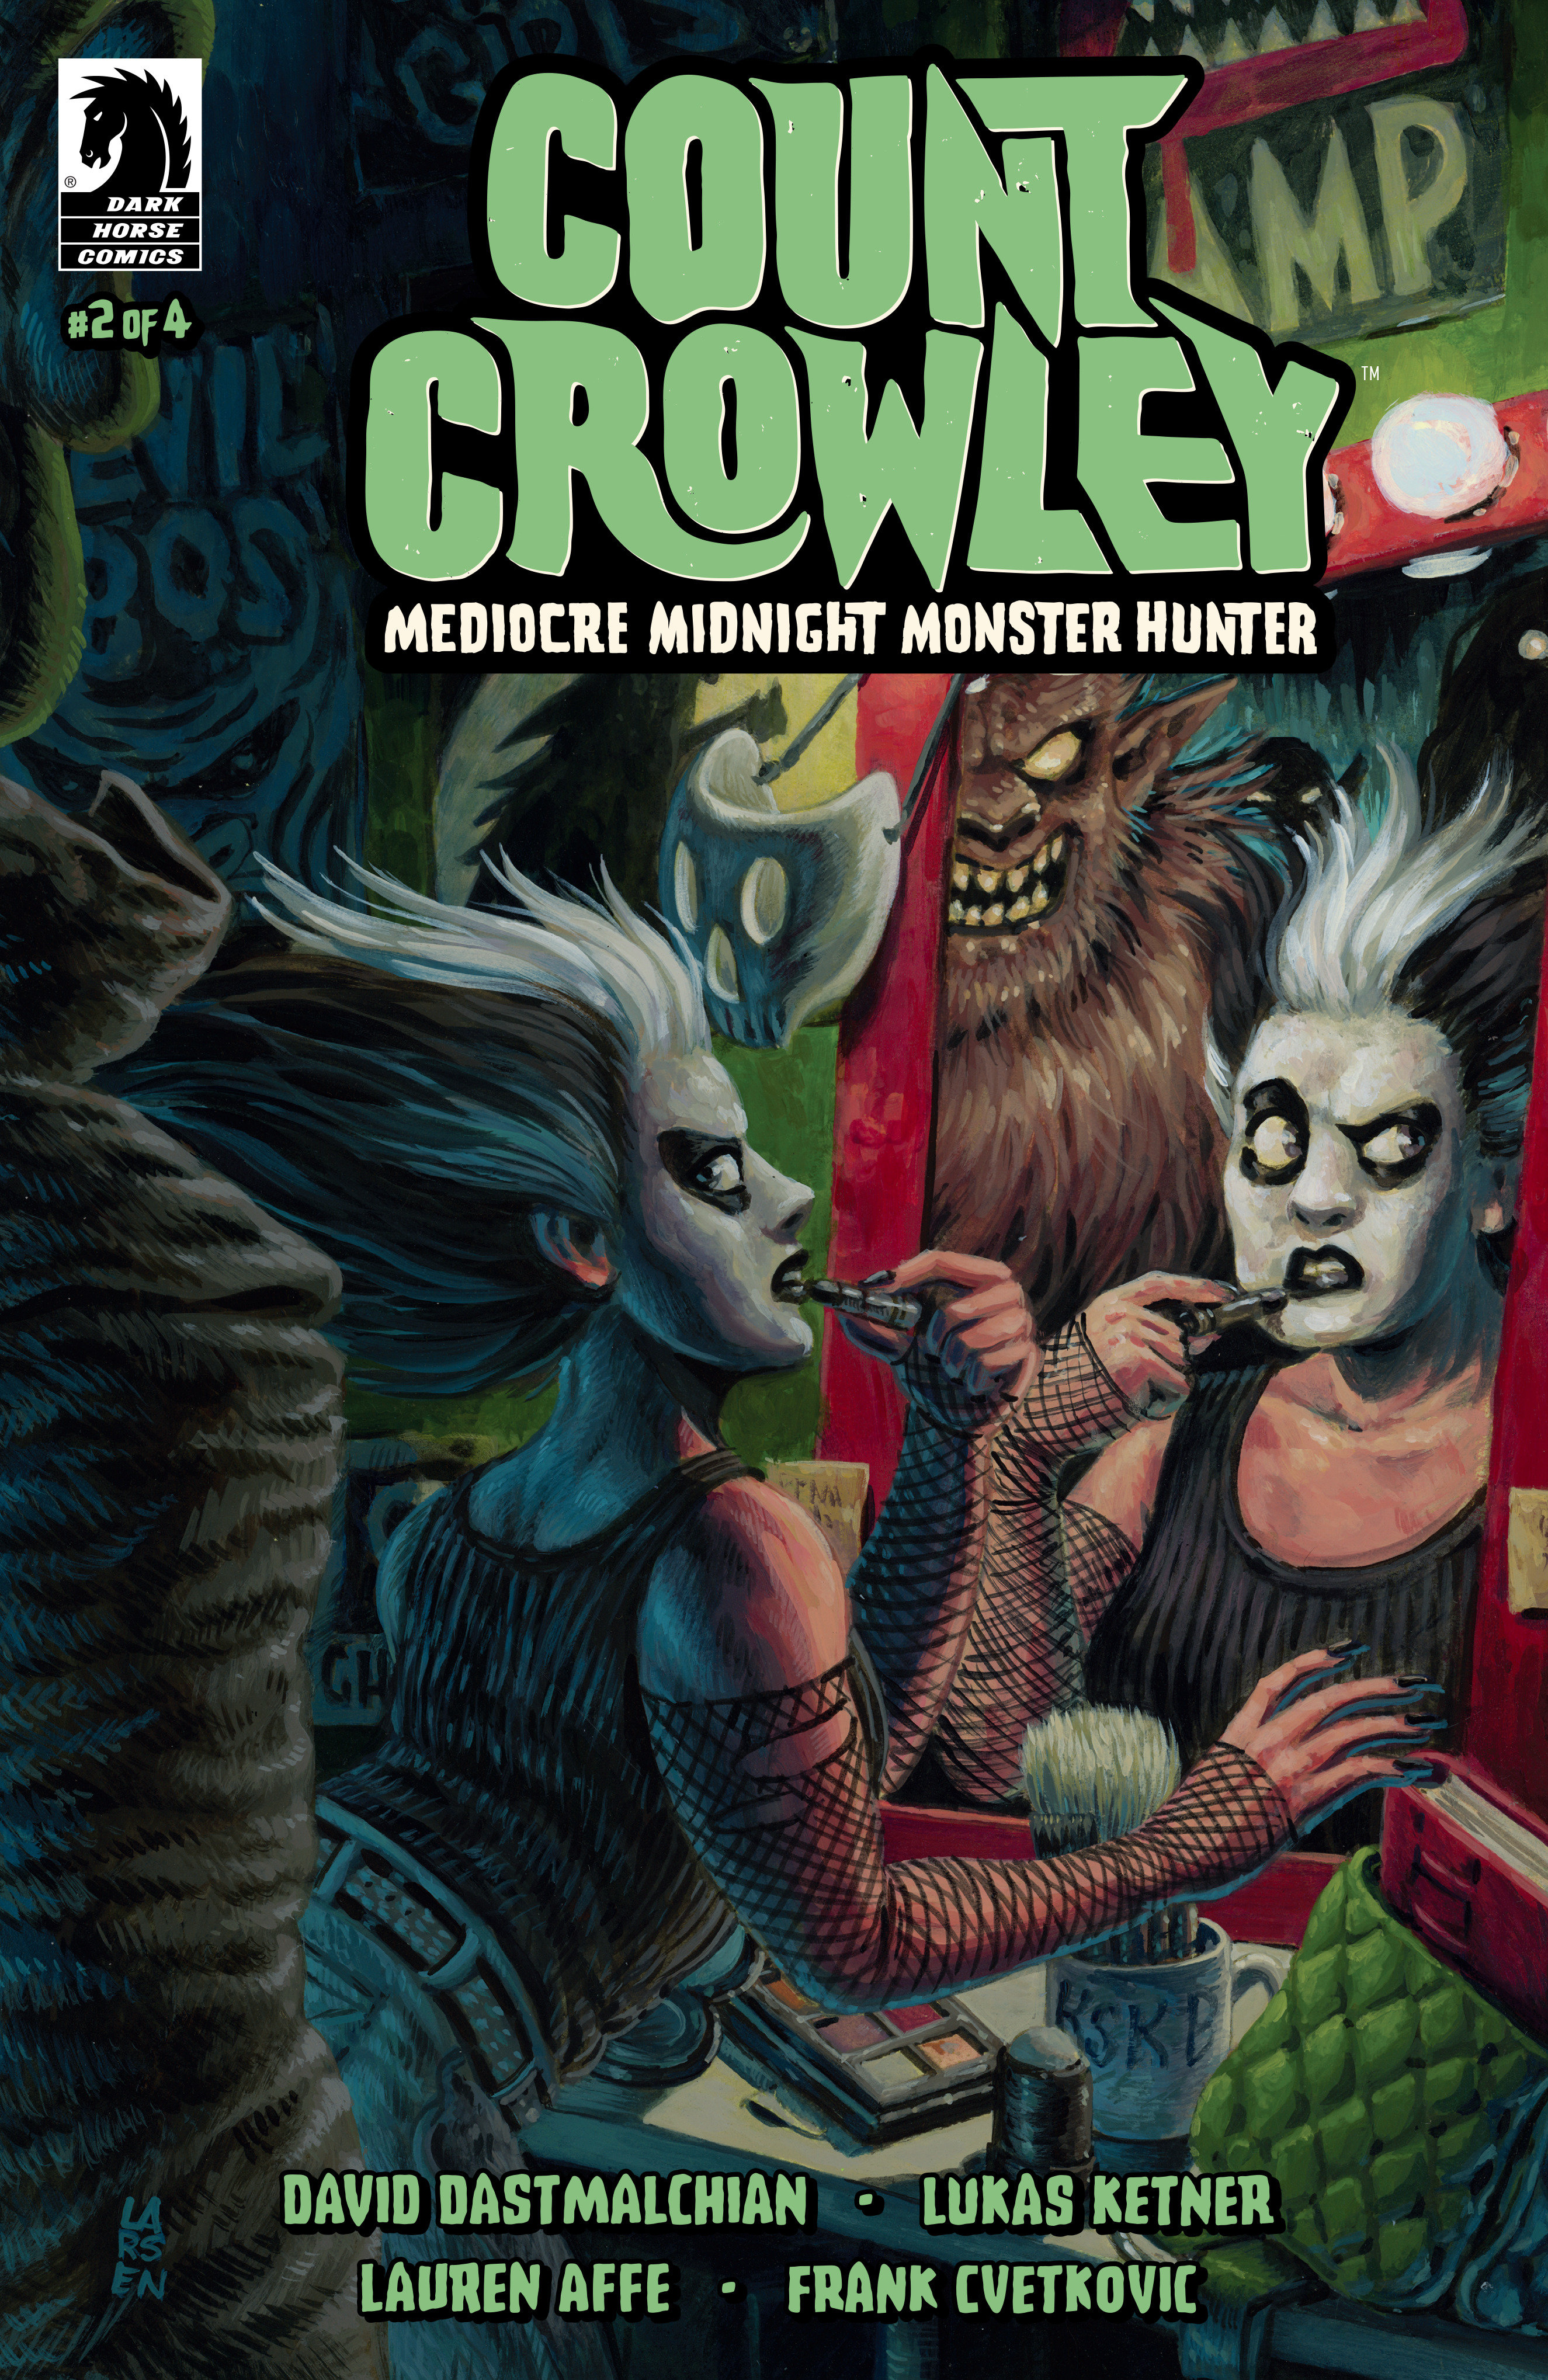 Count Crowley: Mediocre Midnight Monster Hunter #2 Cover B (Christine Larsen)